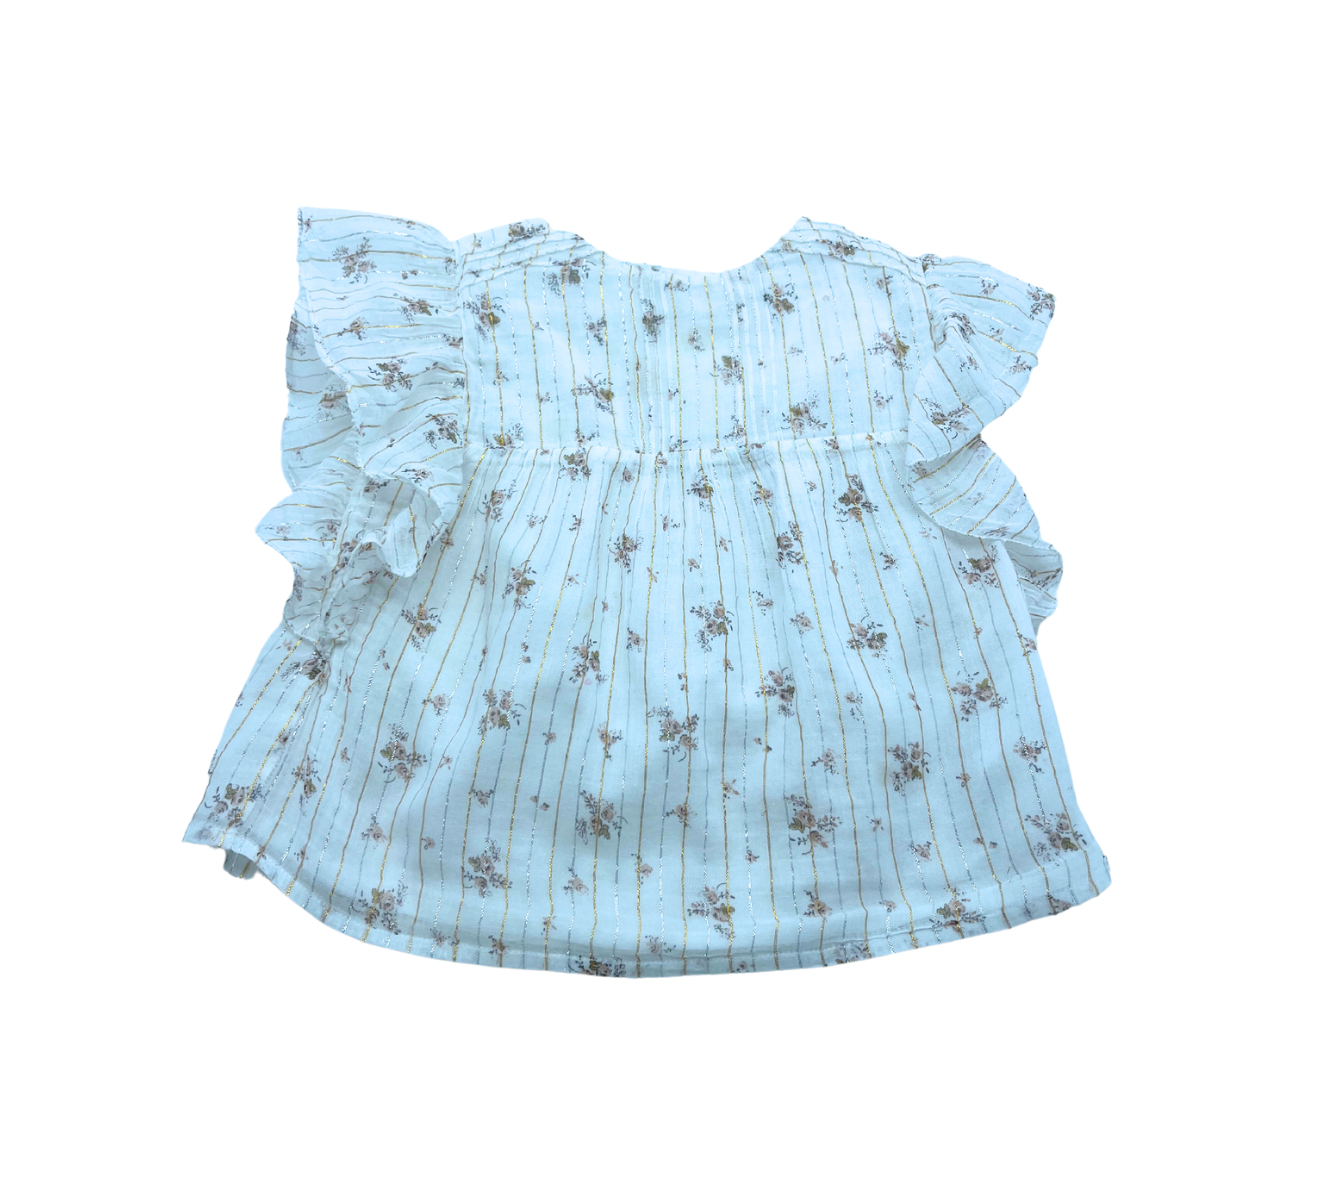 LOUIS LOUISE - Floral blouse - 3 years old